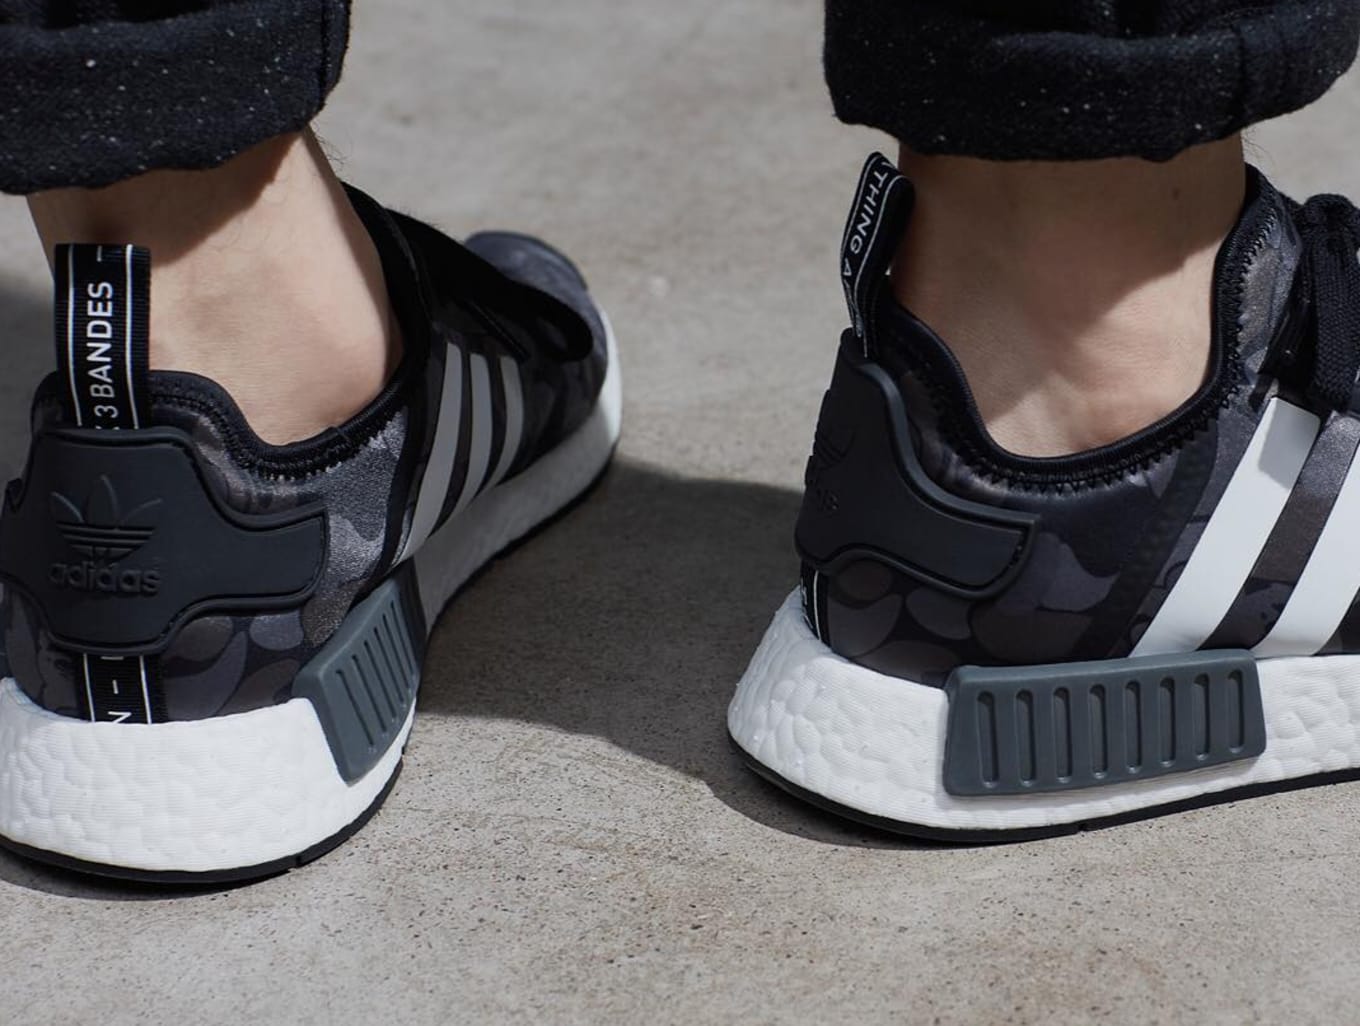 NMD Date | Sole Collector